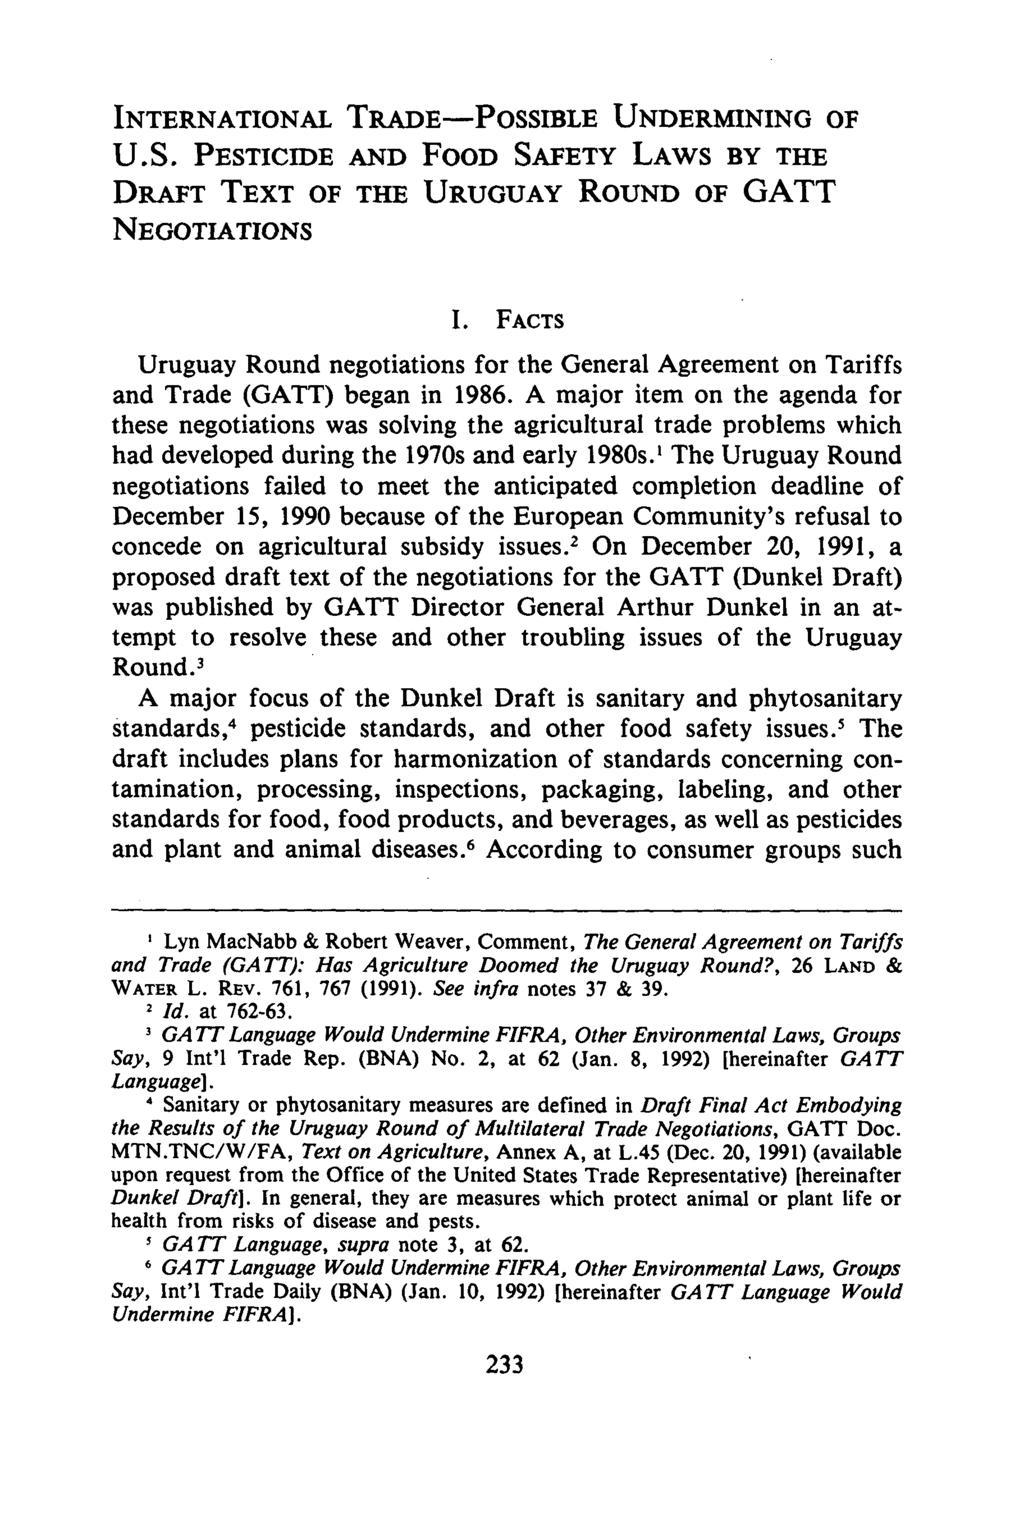 INTERNATIONAL TRADE-POSSIBLE UNDERMINING OF U.S. PESTICIDE AND FOOD SAFETY LAWS BY THE DRAFT TEXT OF THE URUGUAY ROUND OF GATT NEGOTIATIONS I.